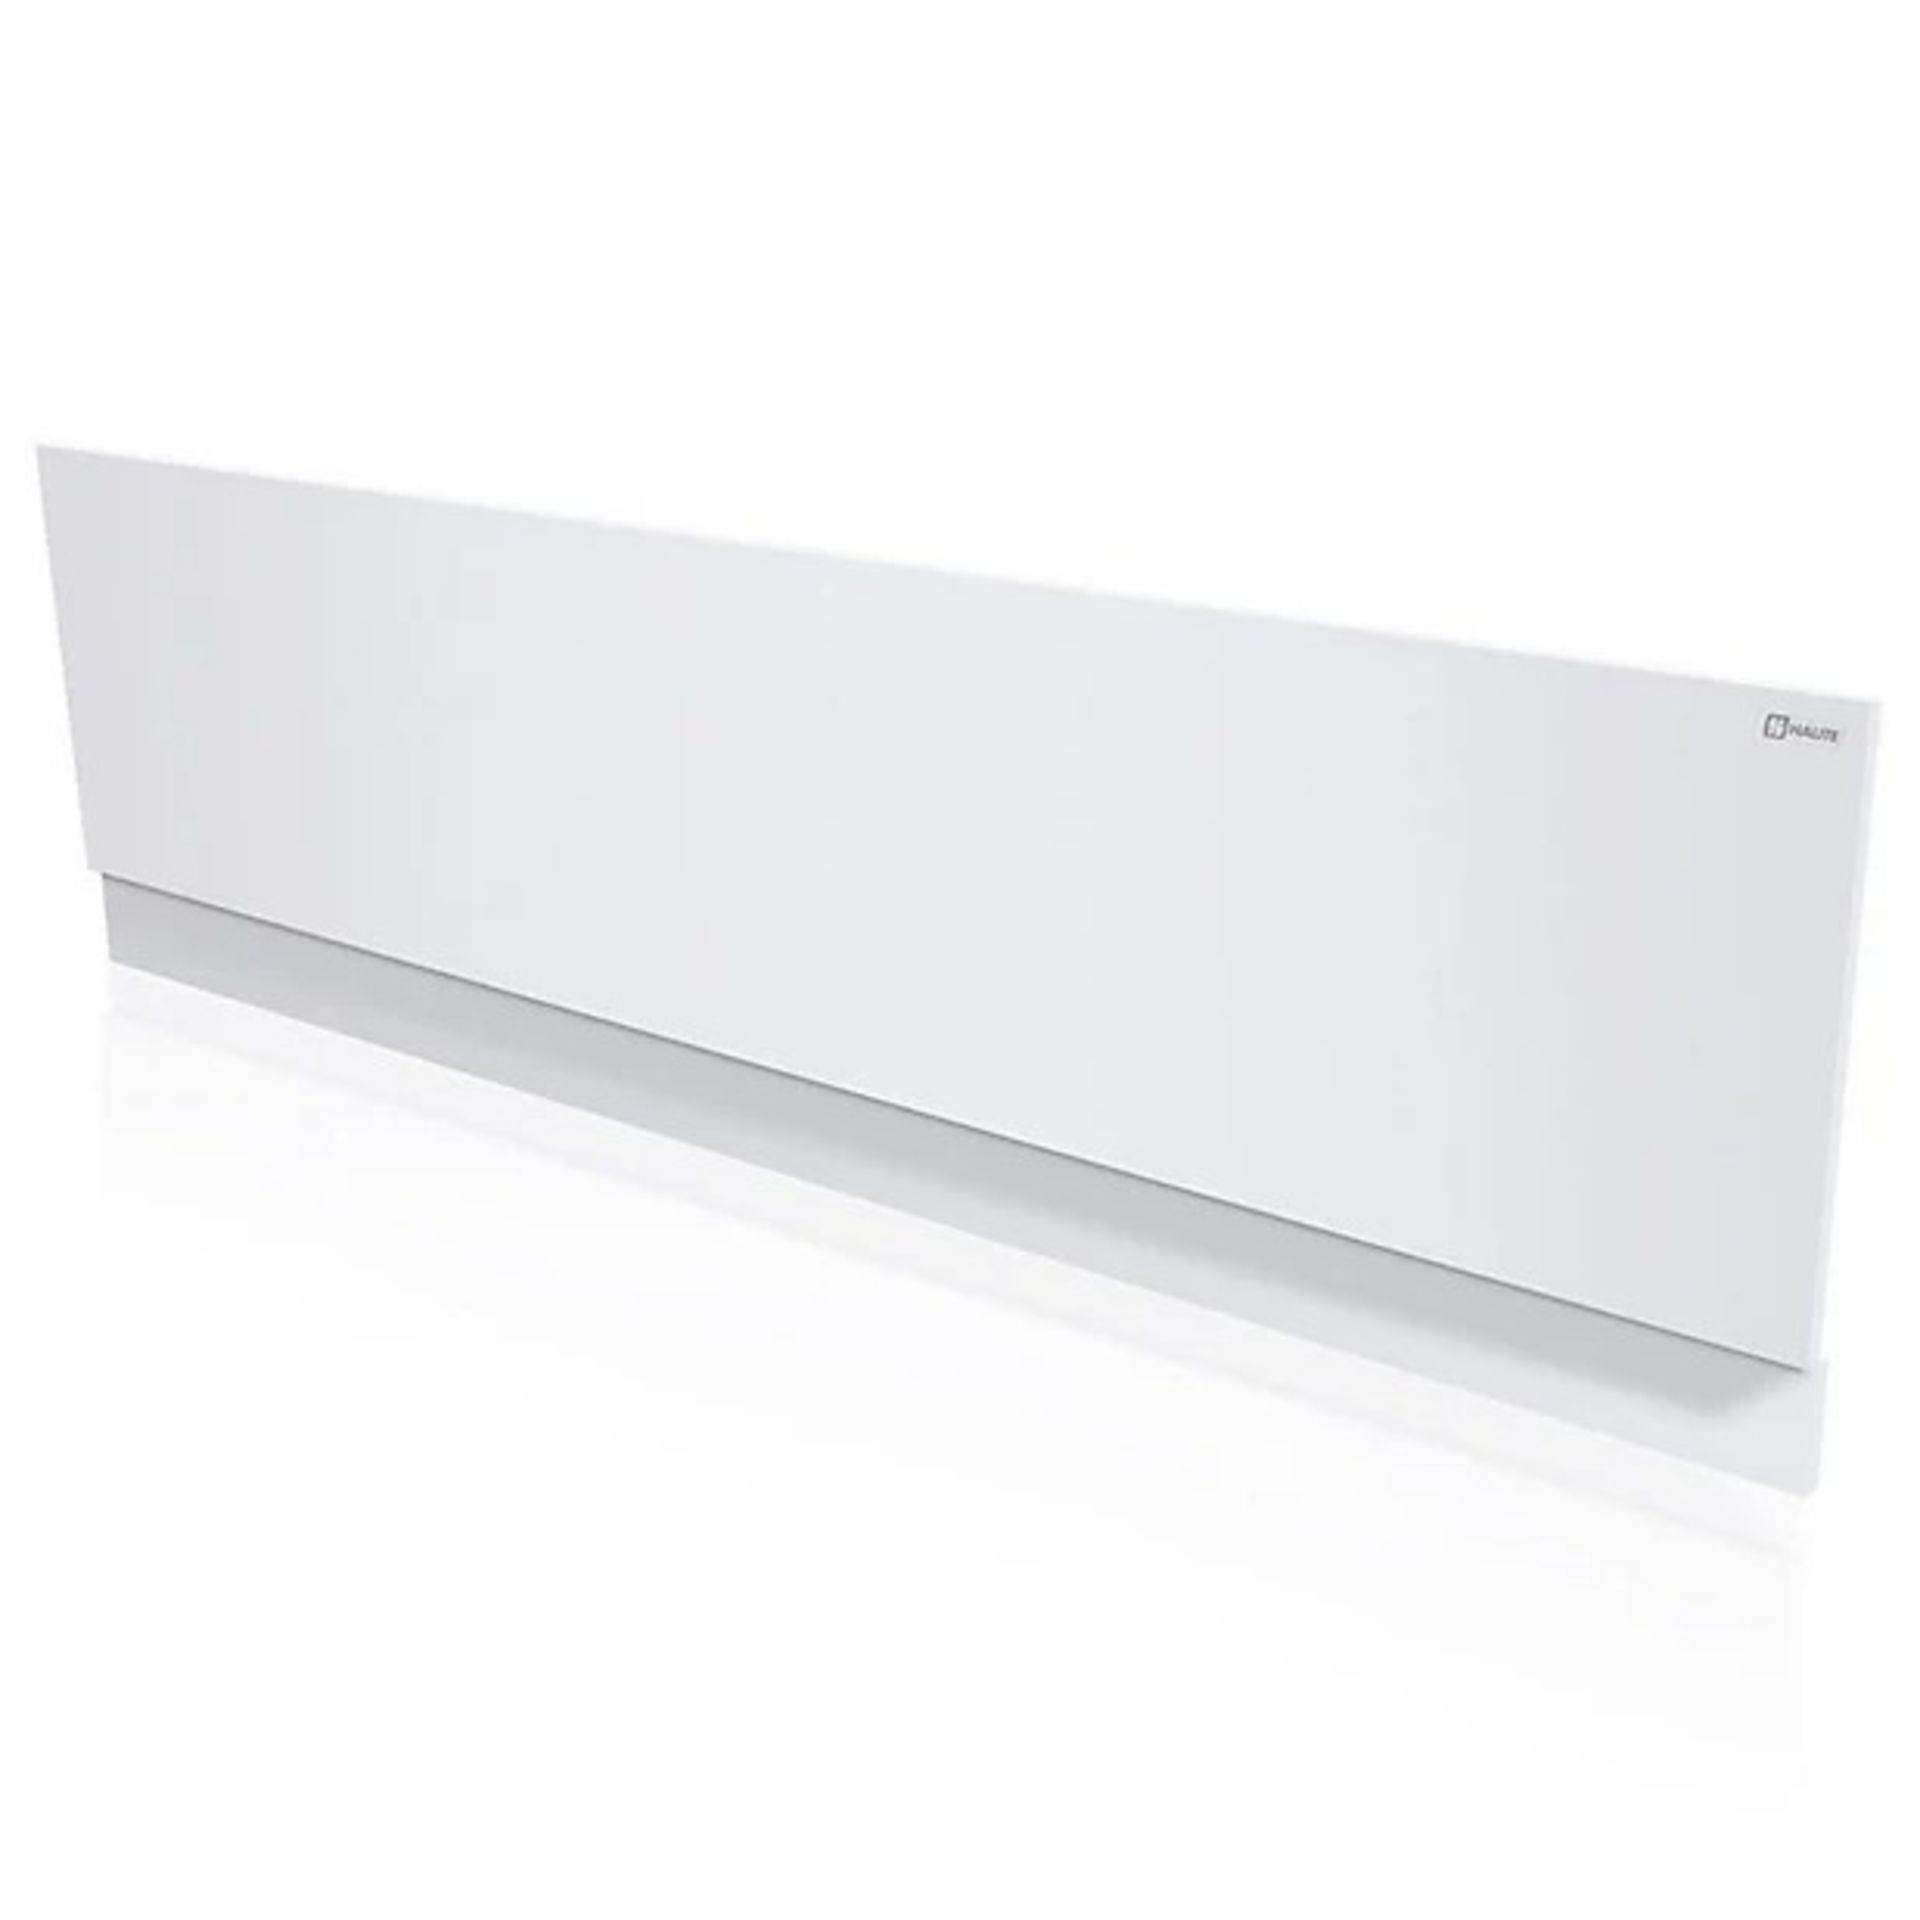 Halite Waterproof 1700mm Front Bath Panel and Plinth - Gloss White - ER45